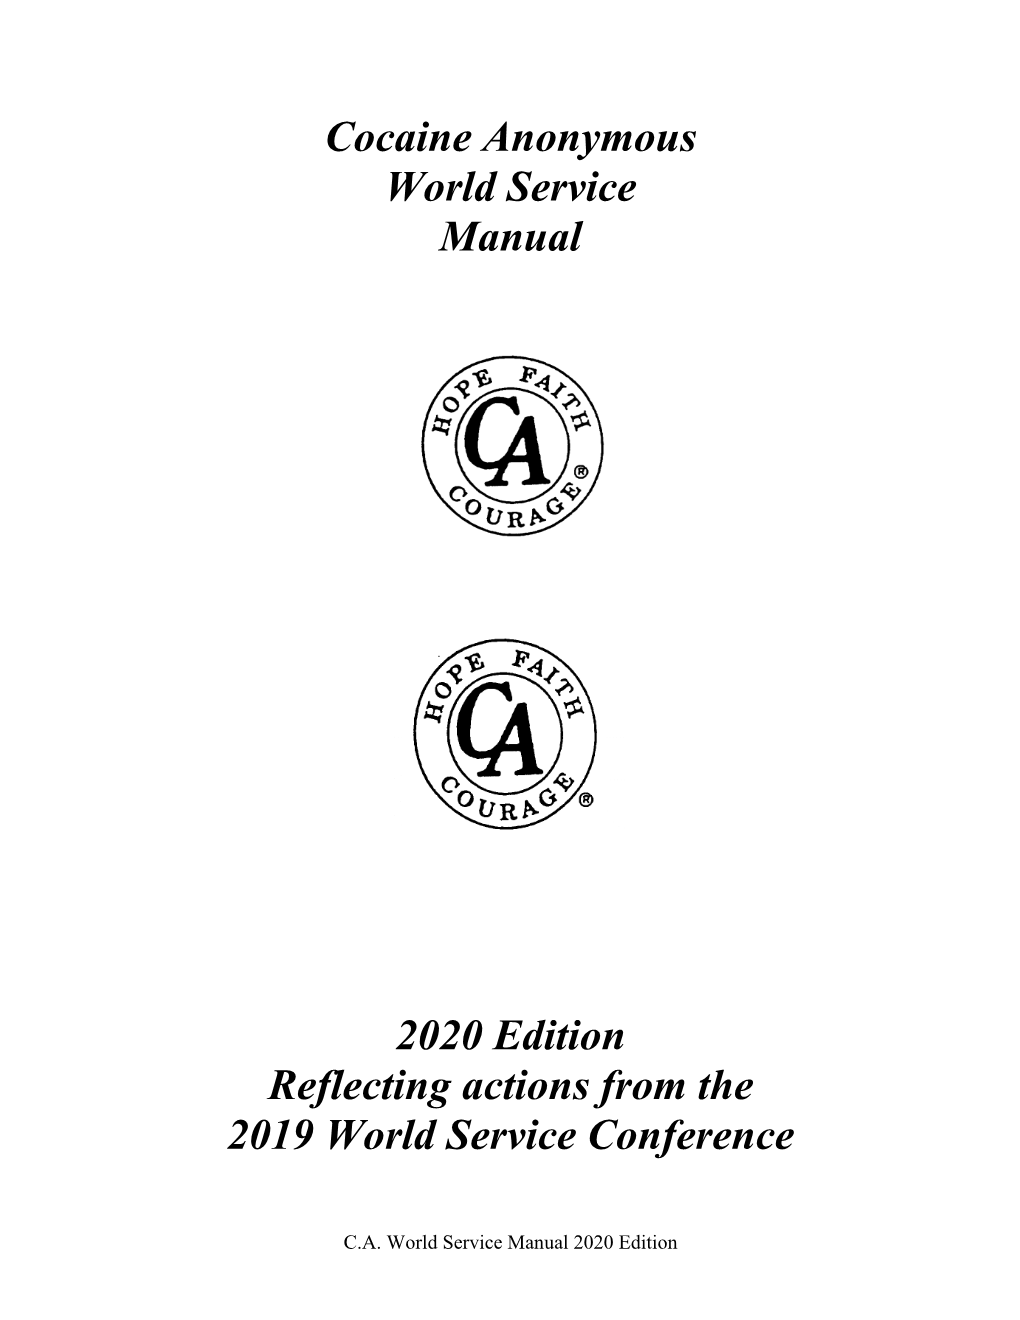 Cocaine Anonymous World Service Manual 2020 Edition Reflecting